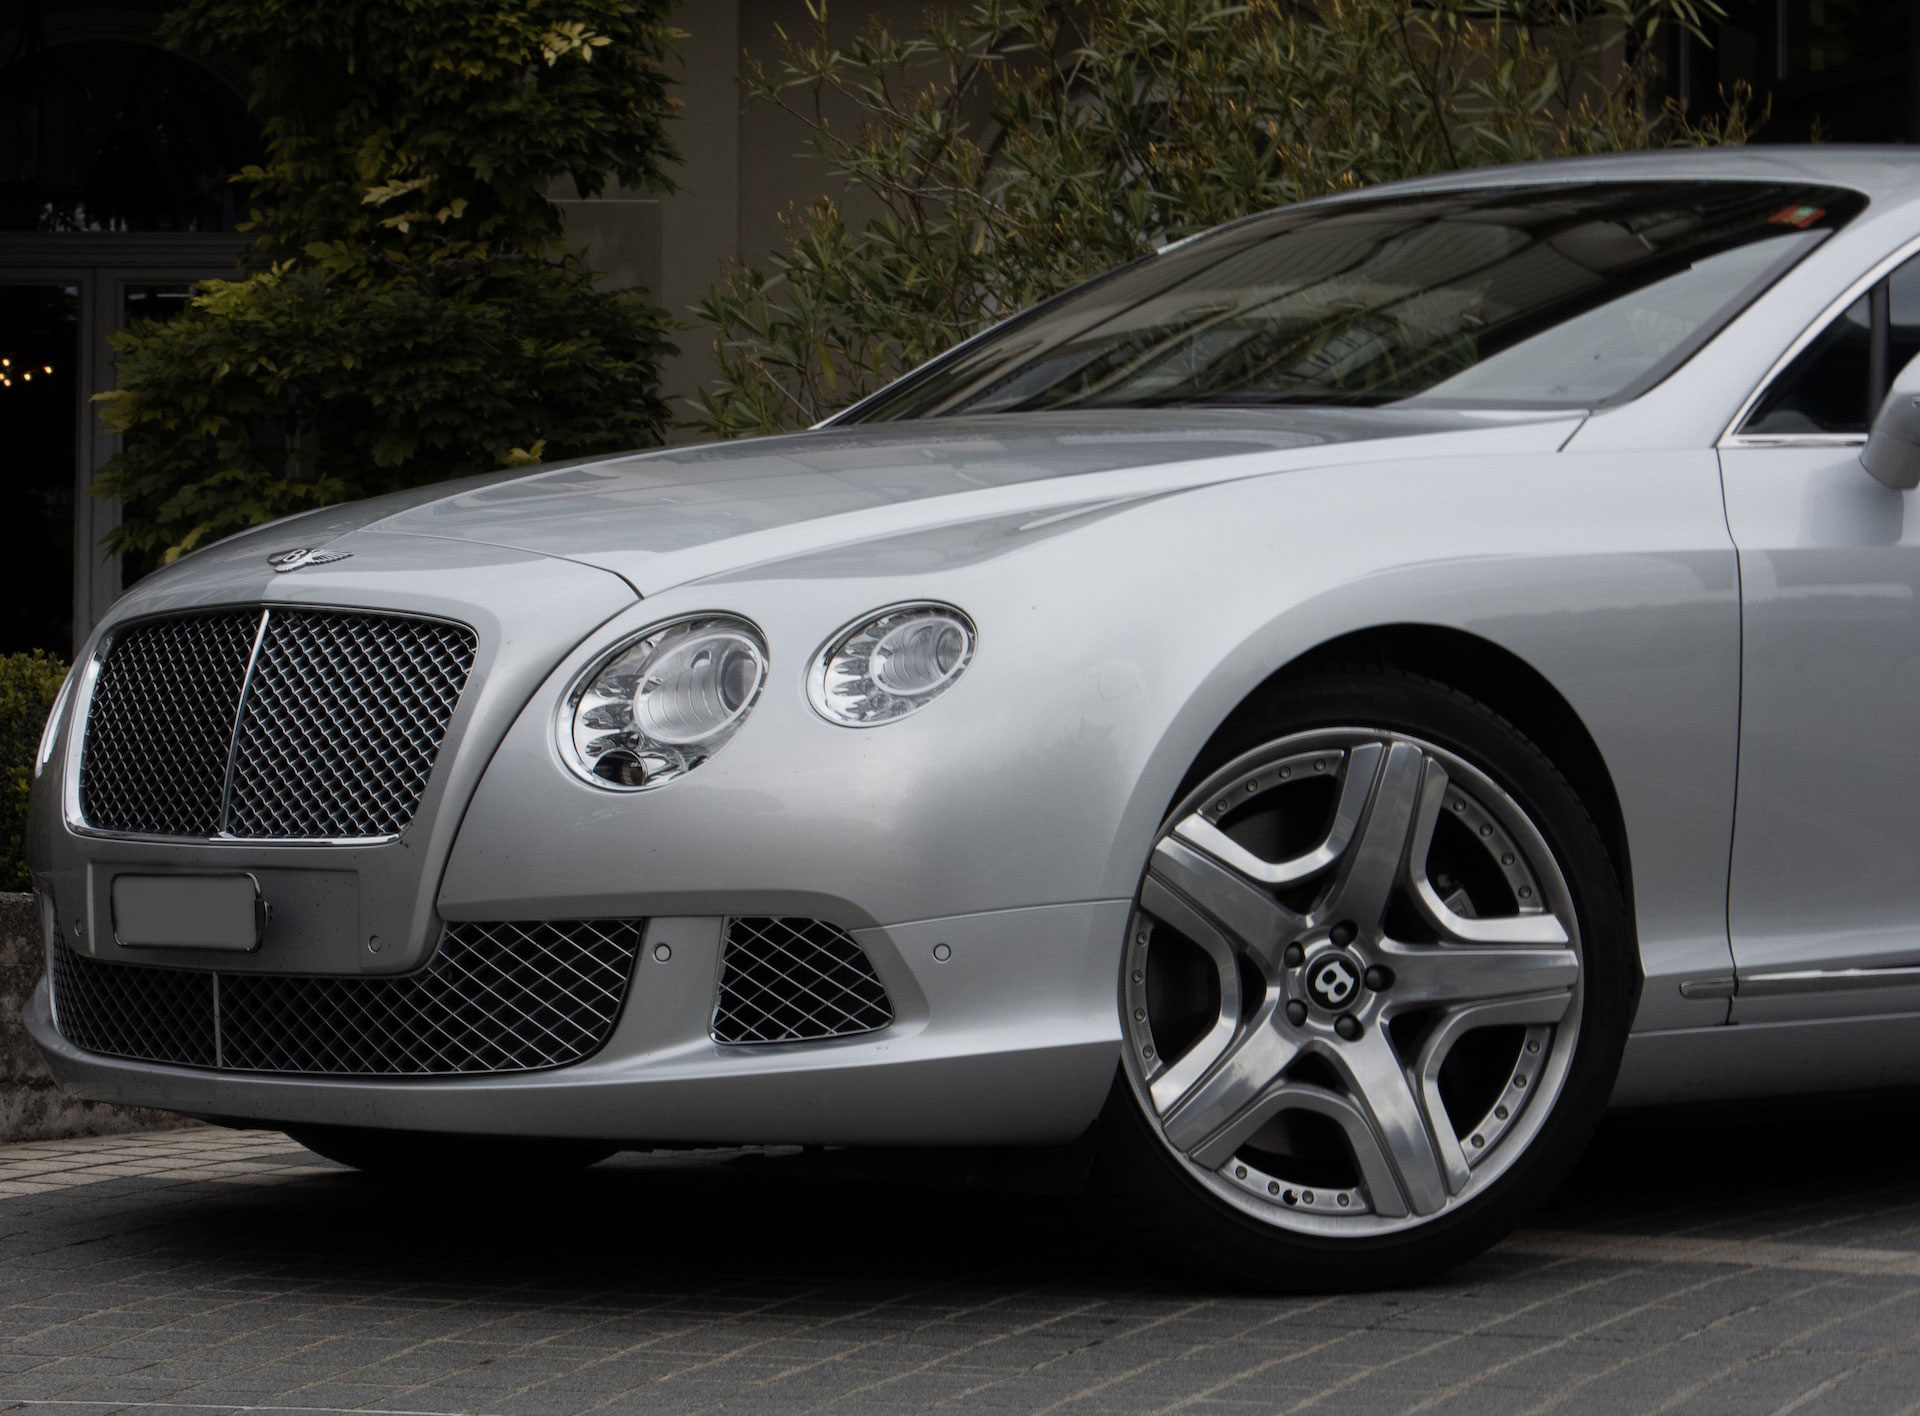 Silver Bentley car parked with wheel turn